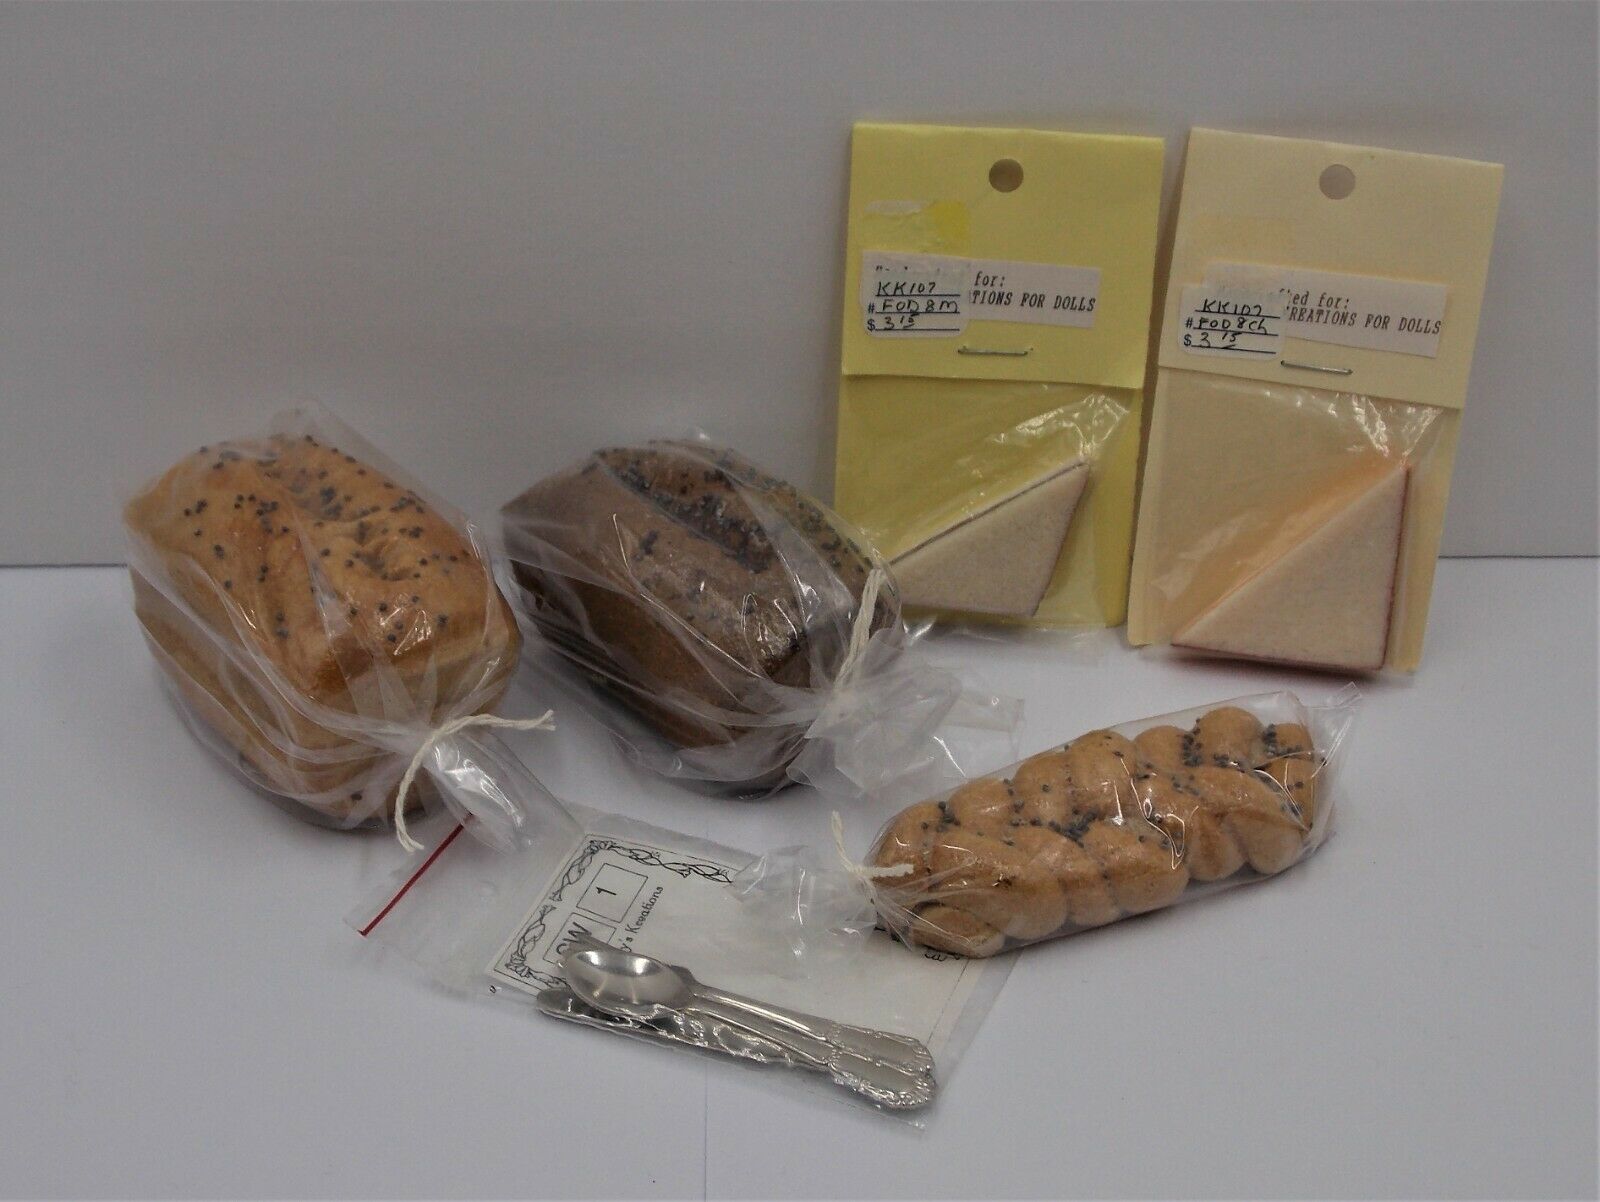 Bread & Sandwich Accessory Lot For 18" American Girl Size Doll D&m Miniatures